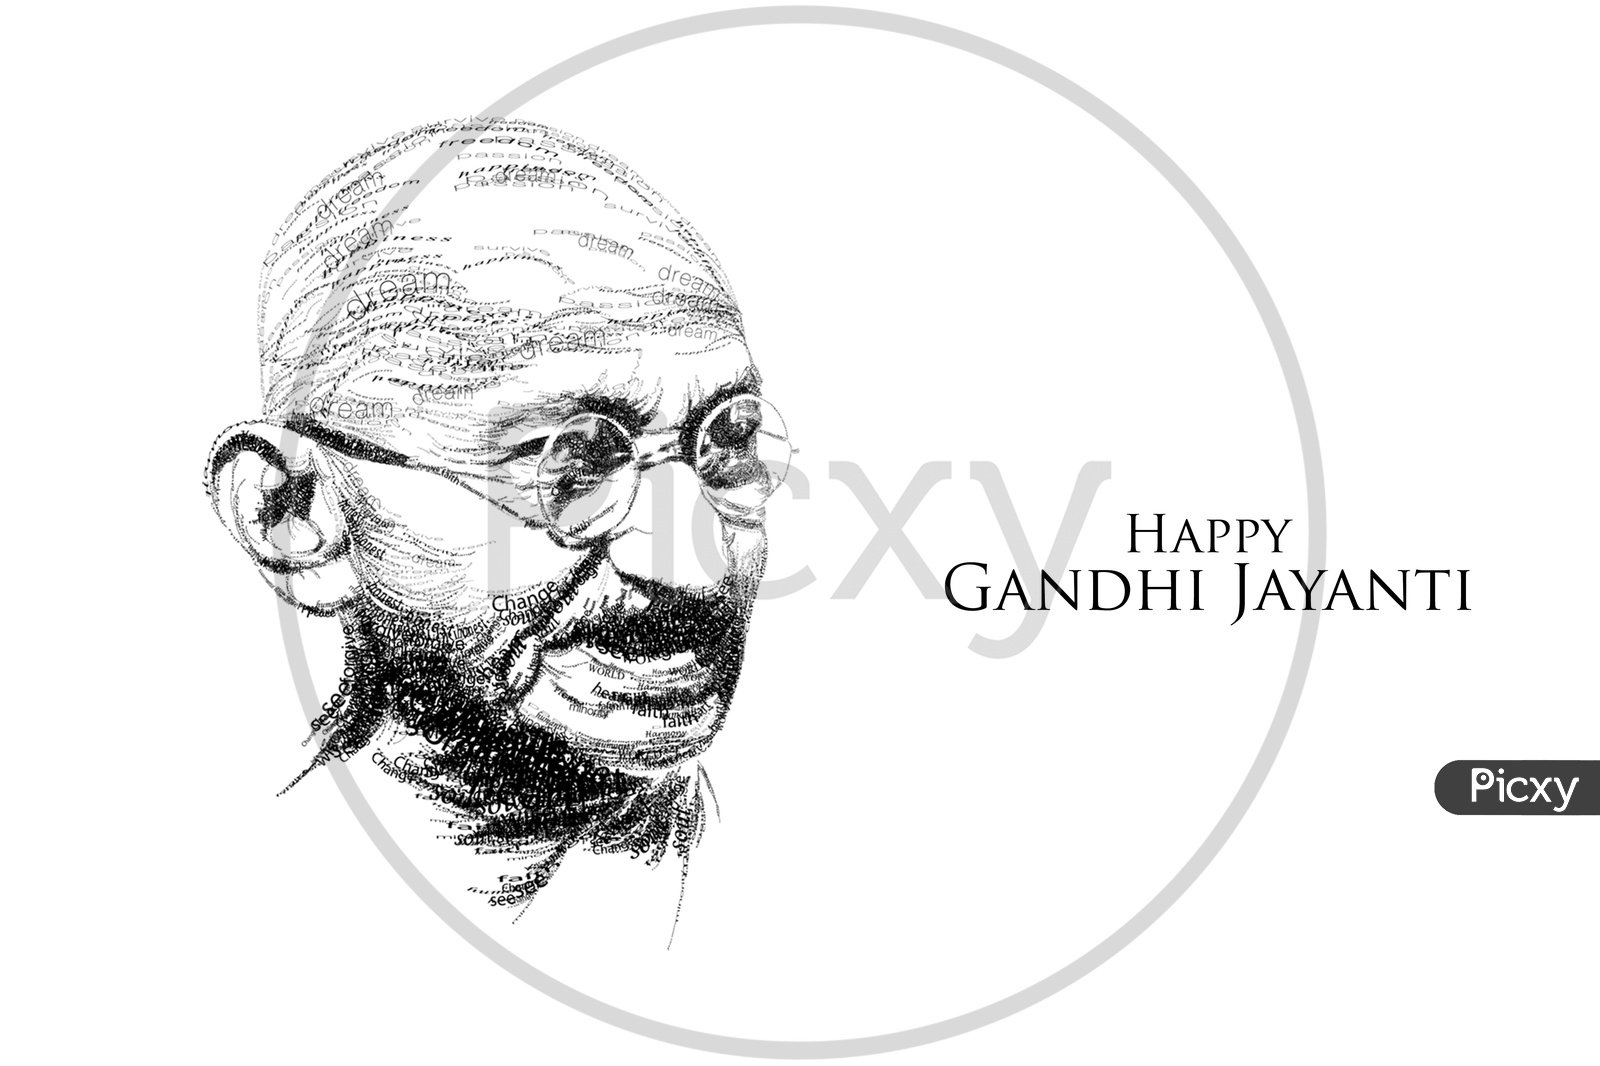 Happy Gandhi Jayanti  wishes on 2nd October on the eve of father of the nation Mohandas Karamchand Gandhi Birthday in India